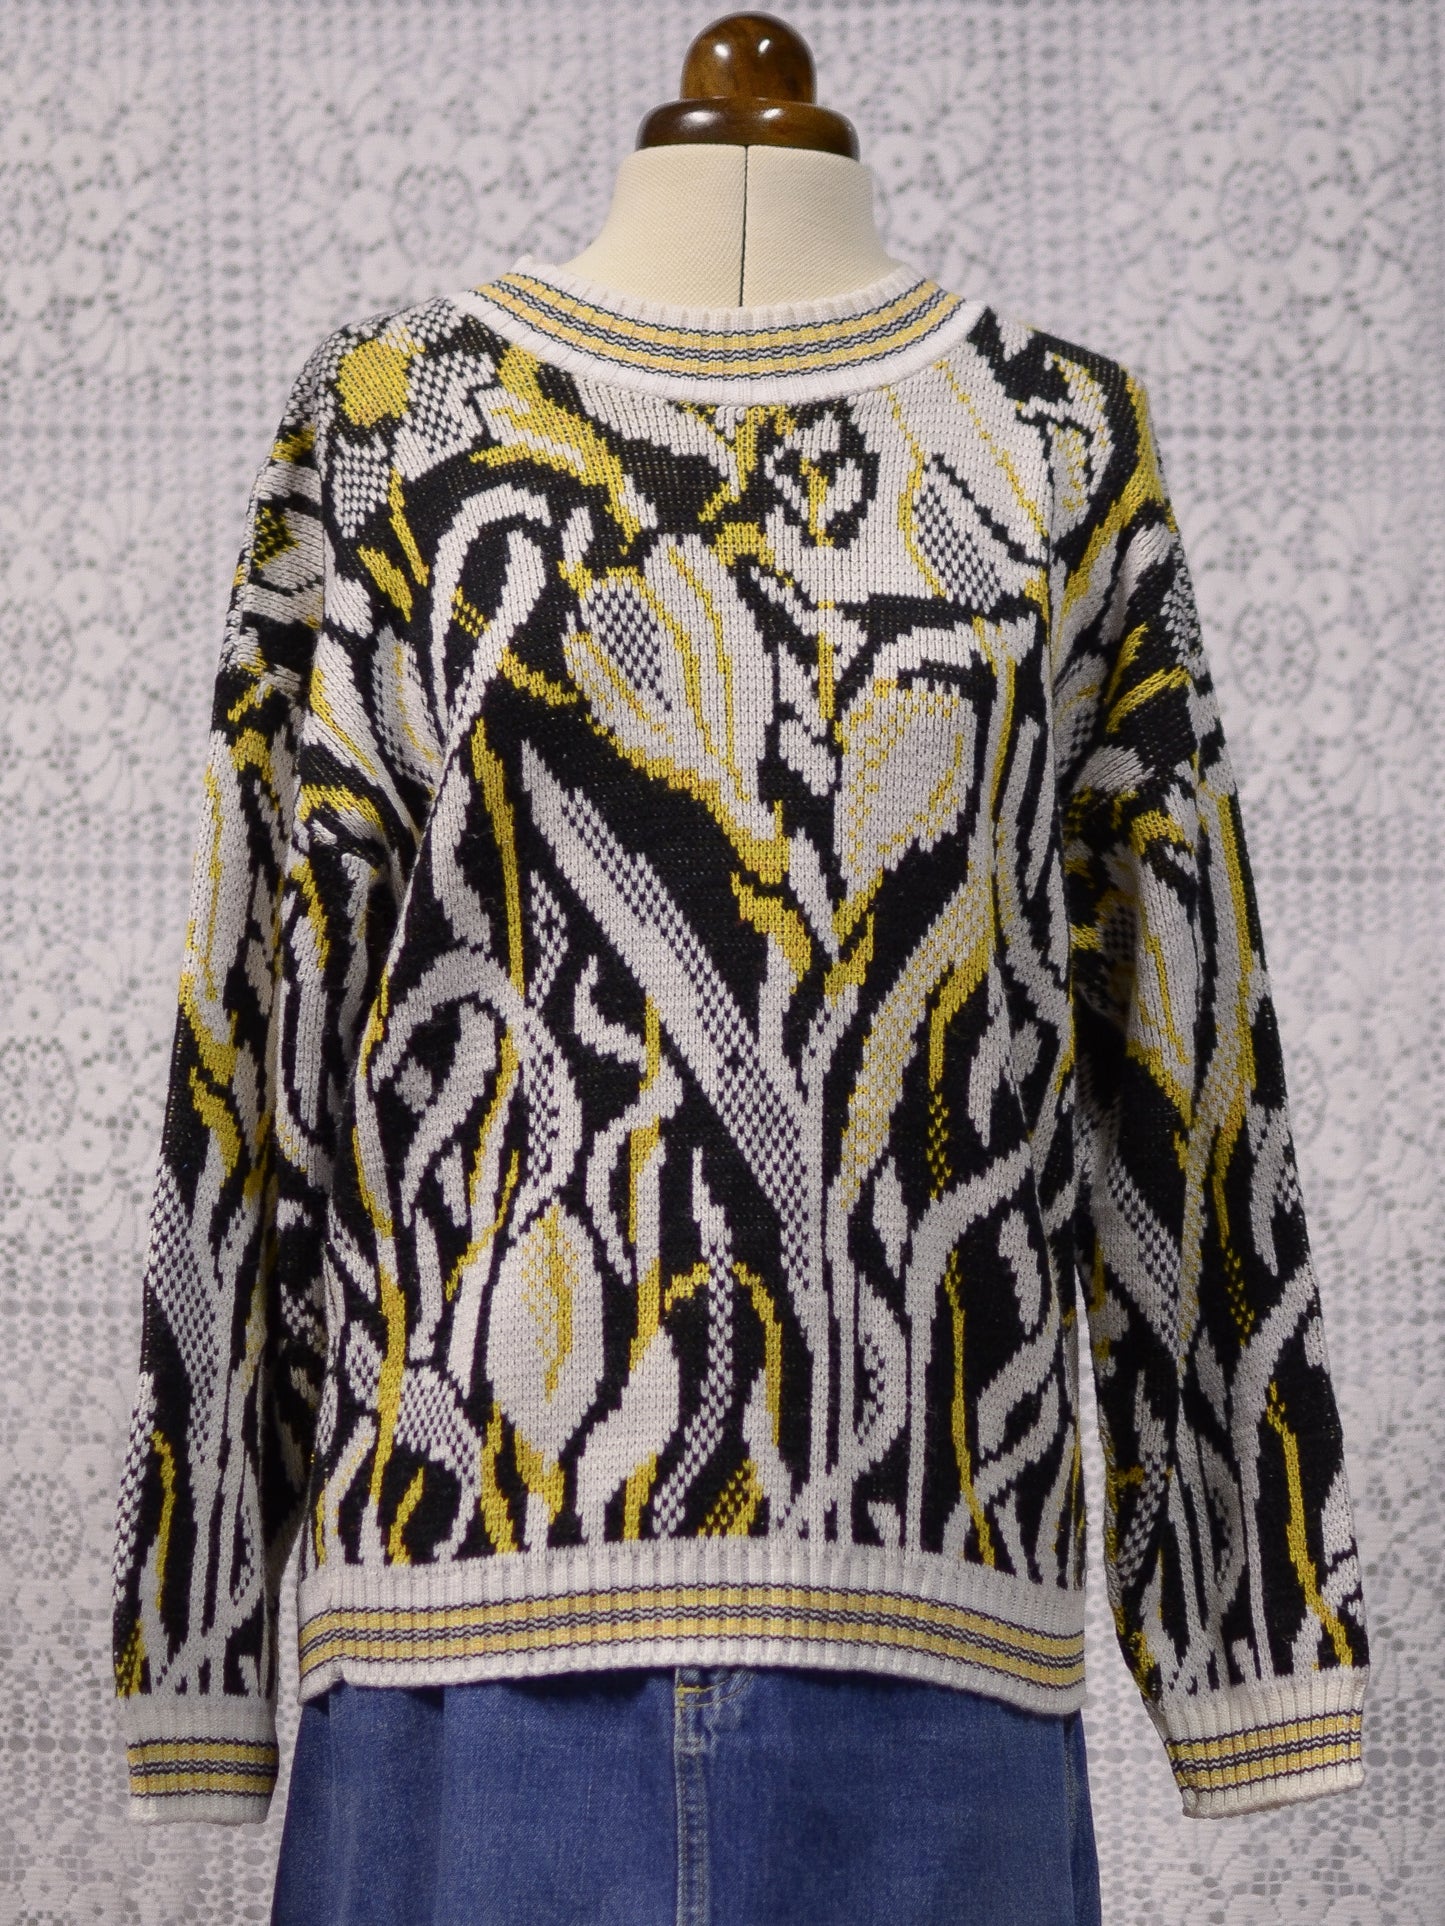 1980s black, white and yellow abstract floral jumper